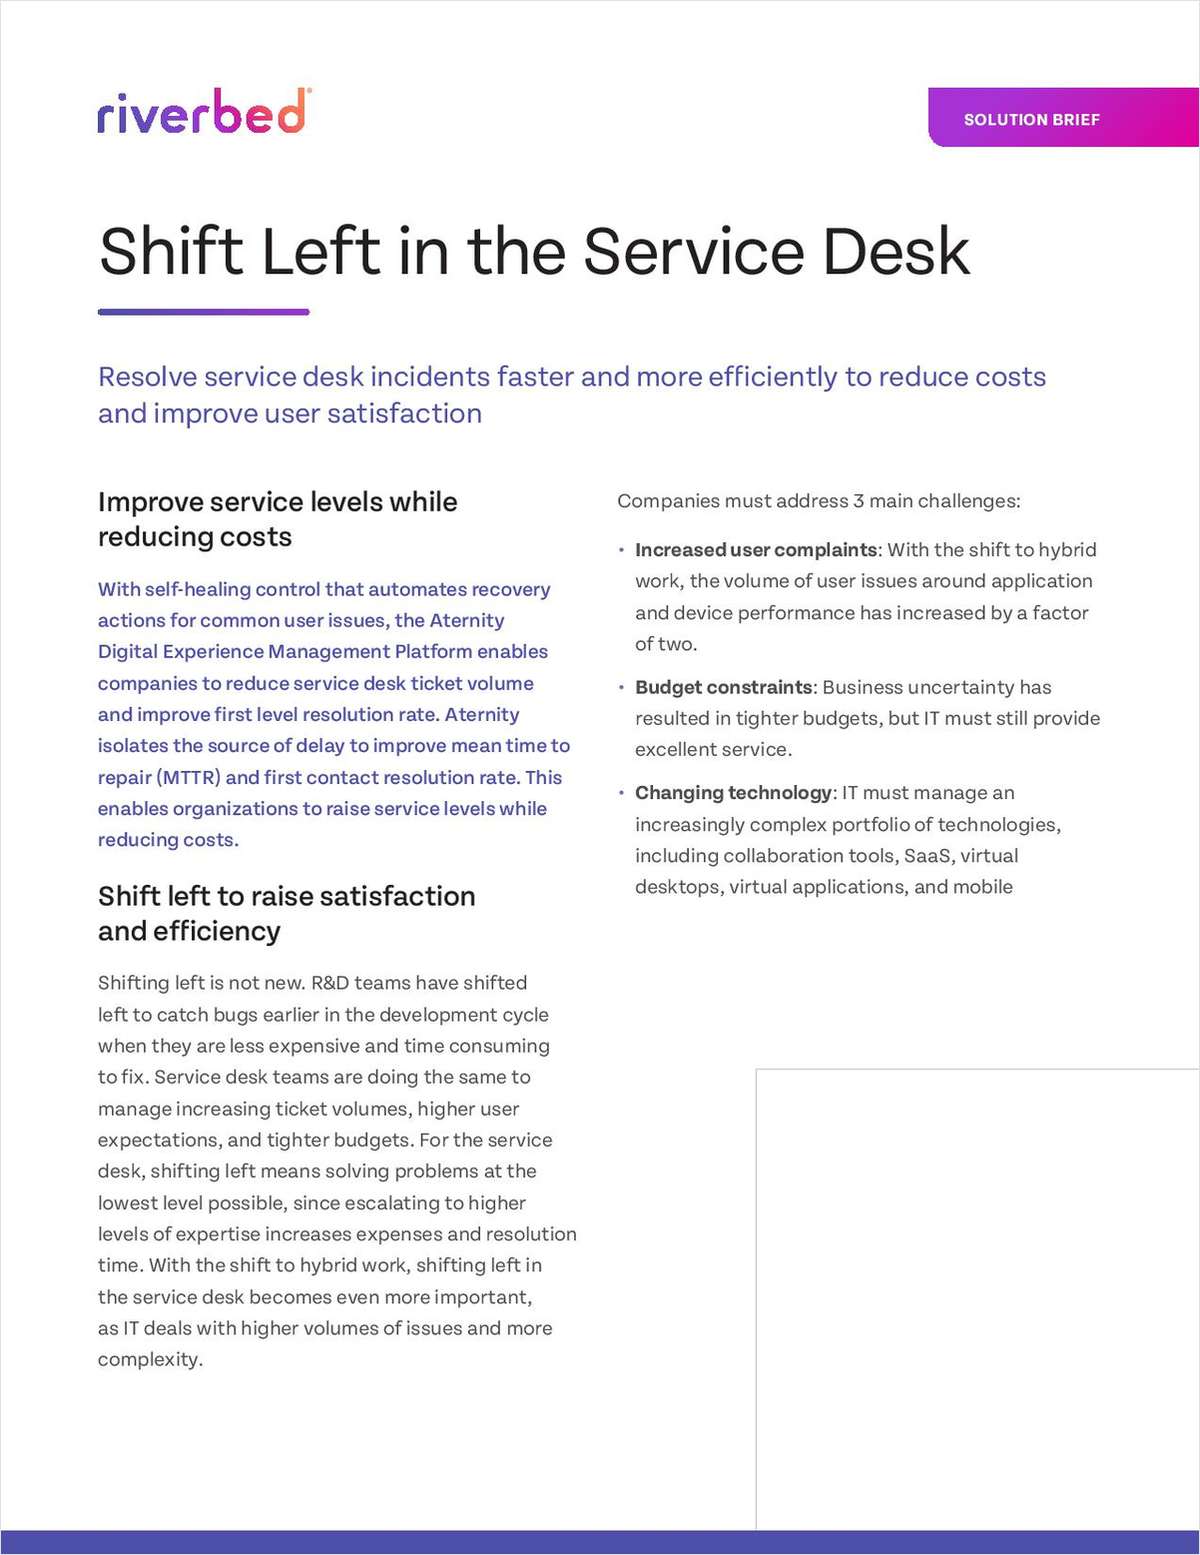 Are You Ready to Shift Left in the Service Desk?